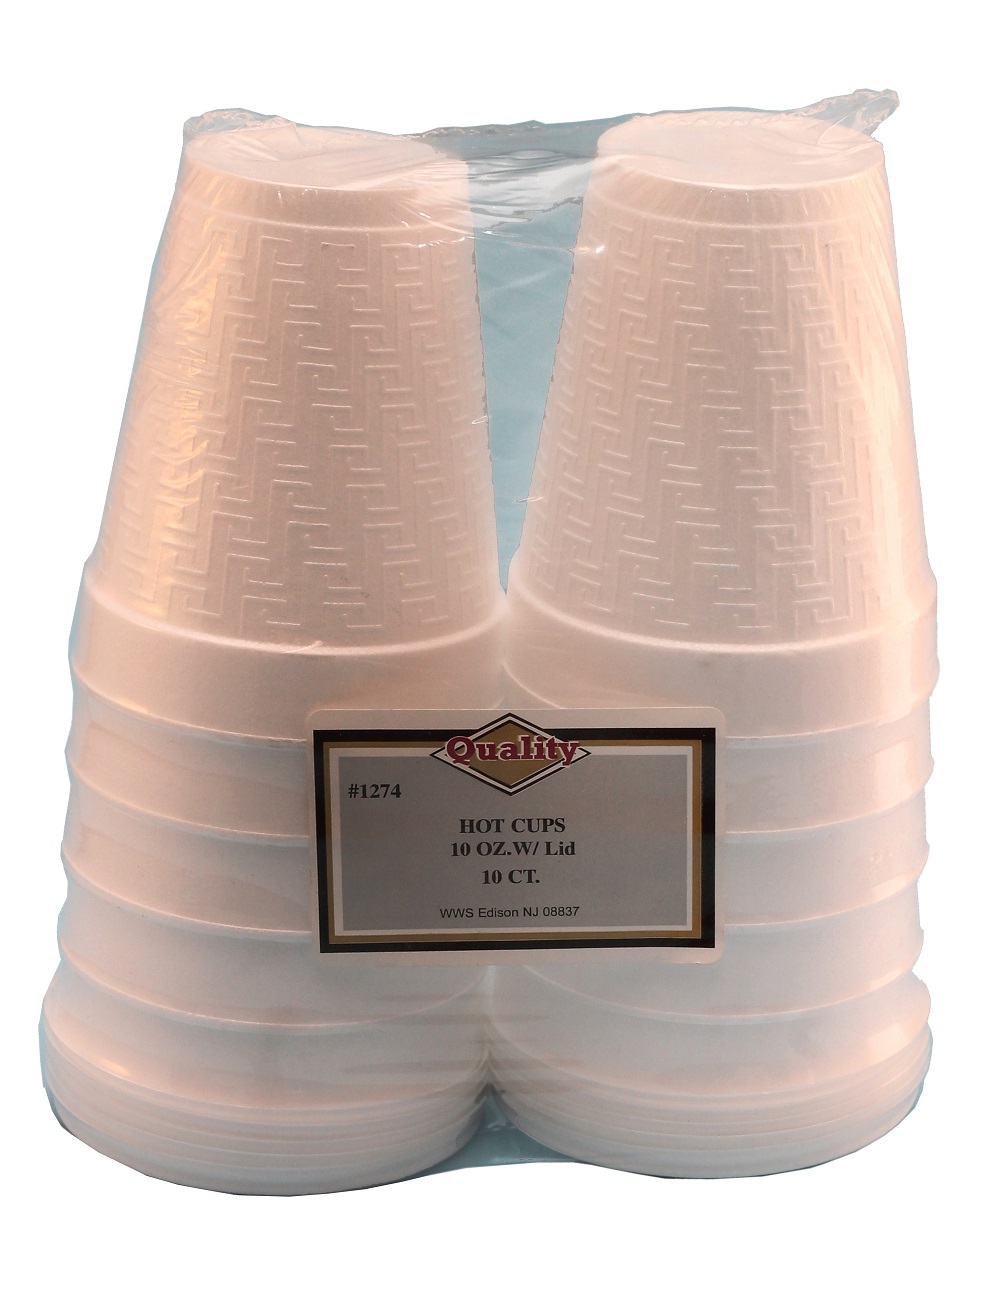 1274 Quality White 10 oz. Foam Cups and Lid Combo 48/10 cs